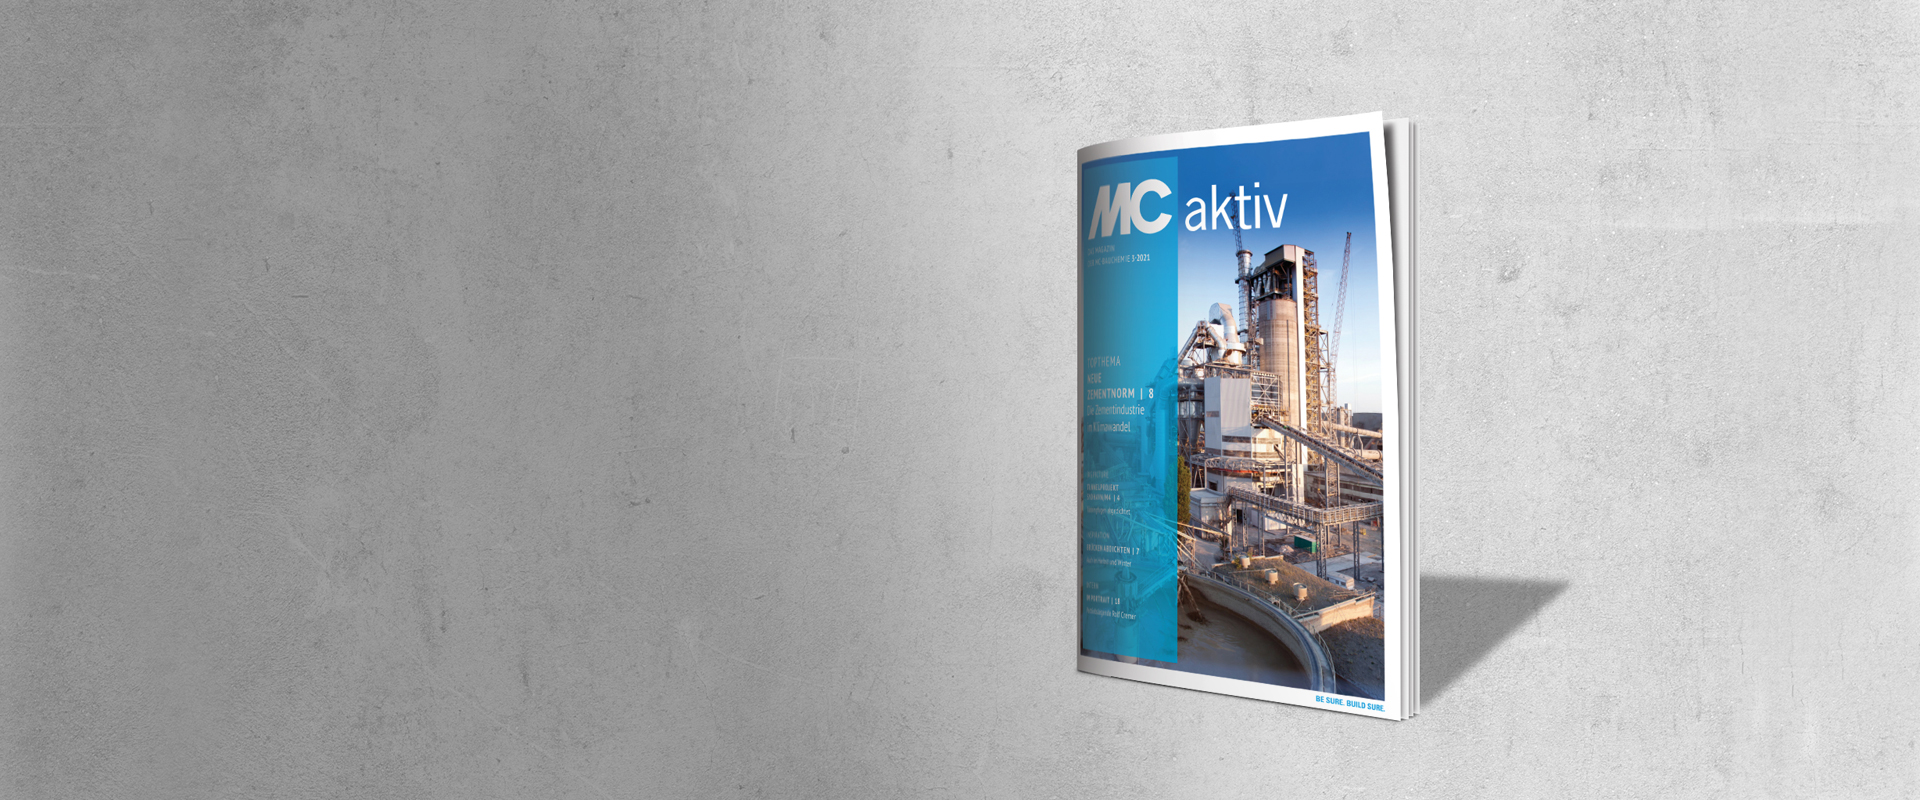 The new MC aktiv 3/21 has been published